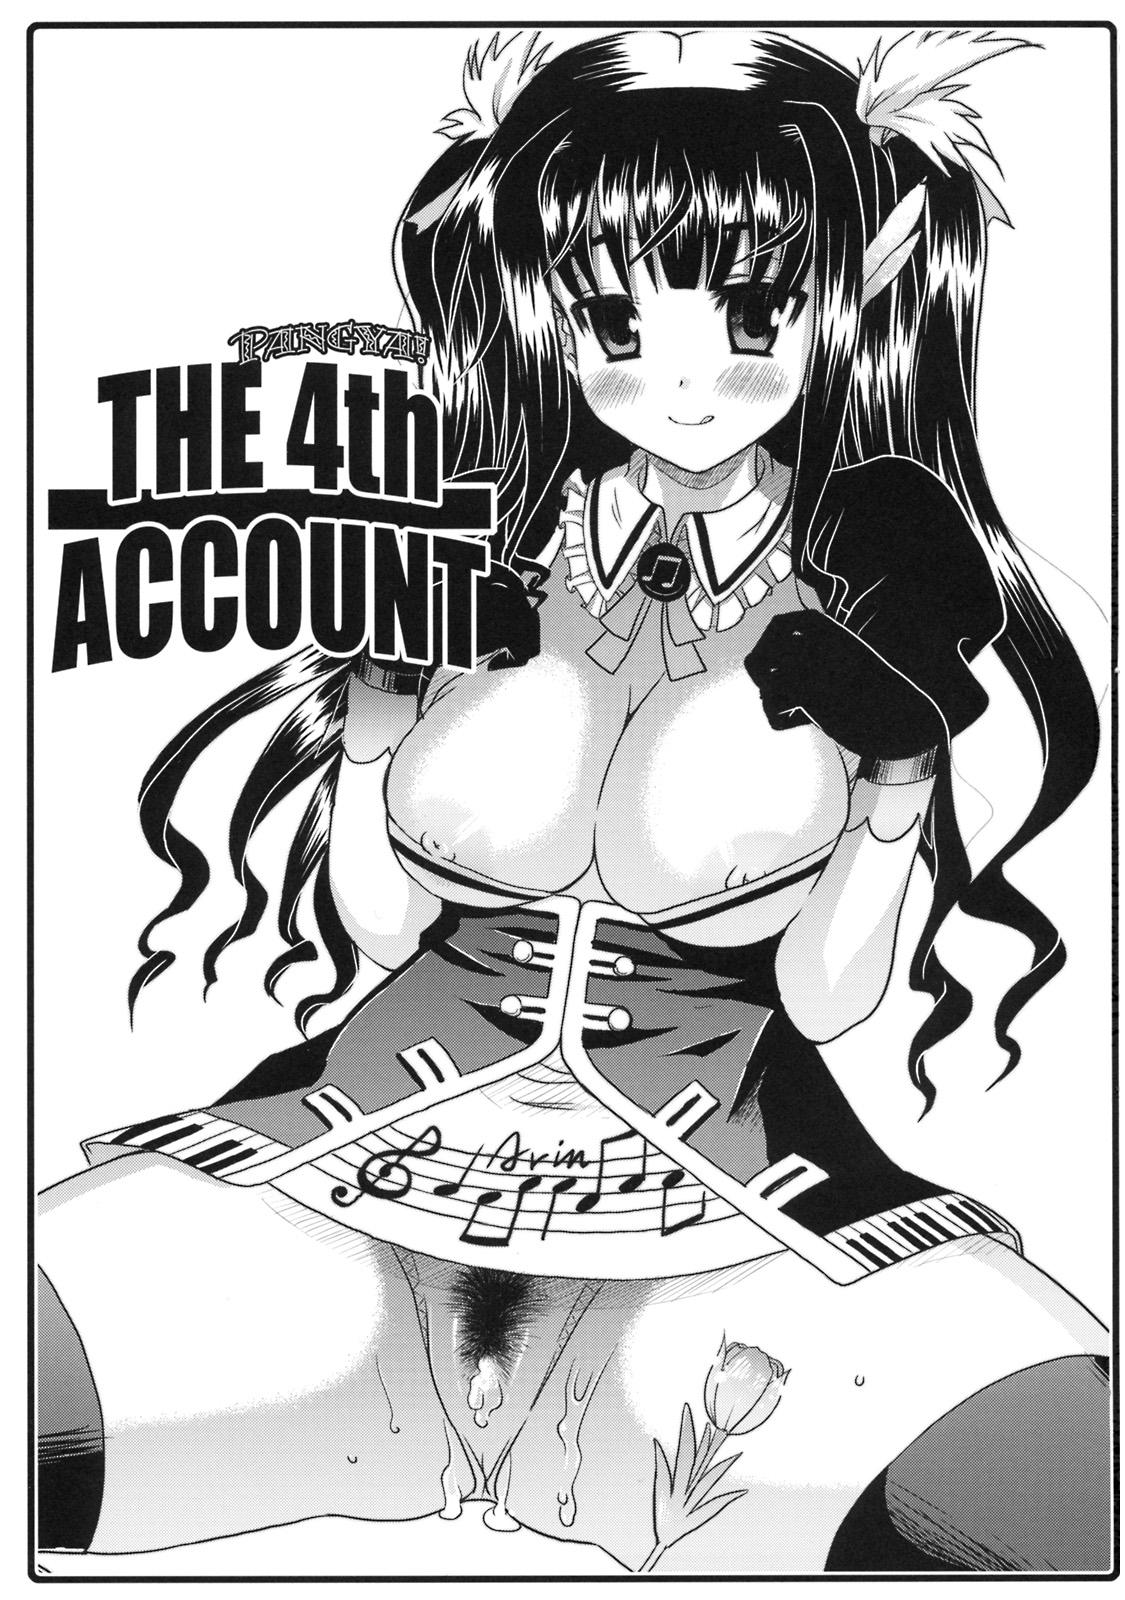 THE 4th ACCOUNT 1